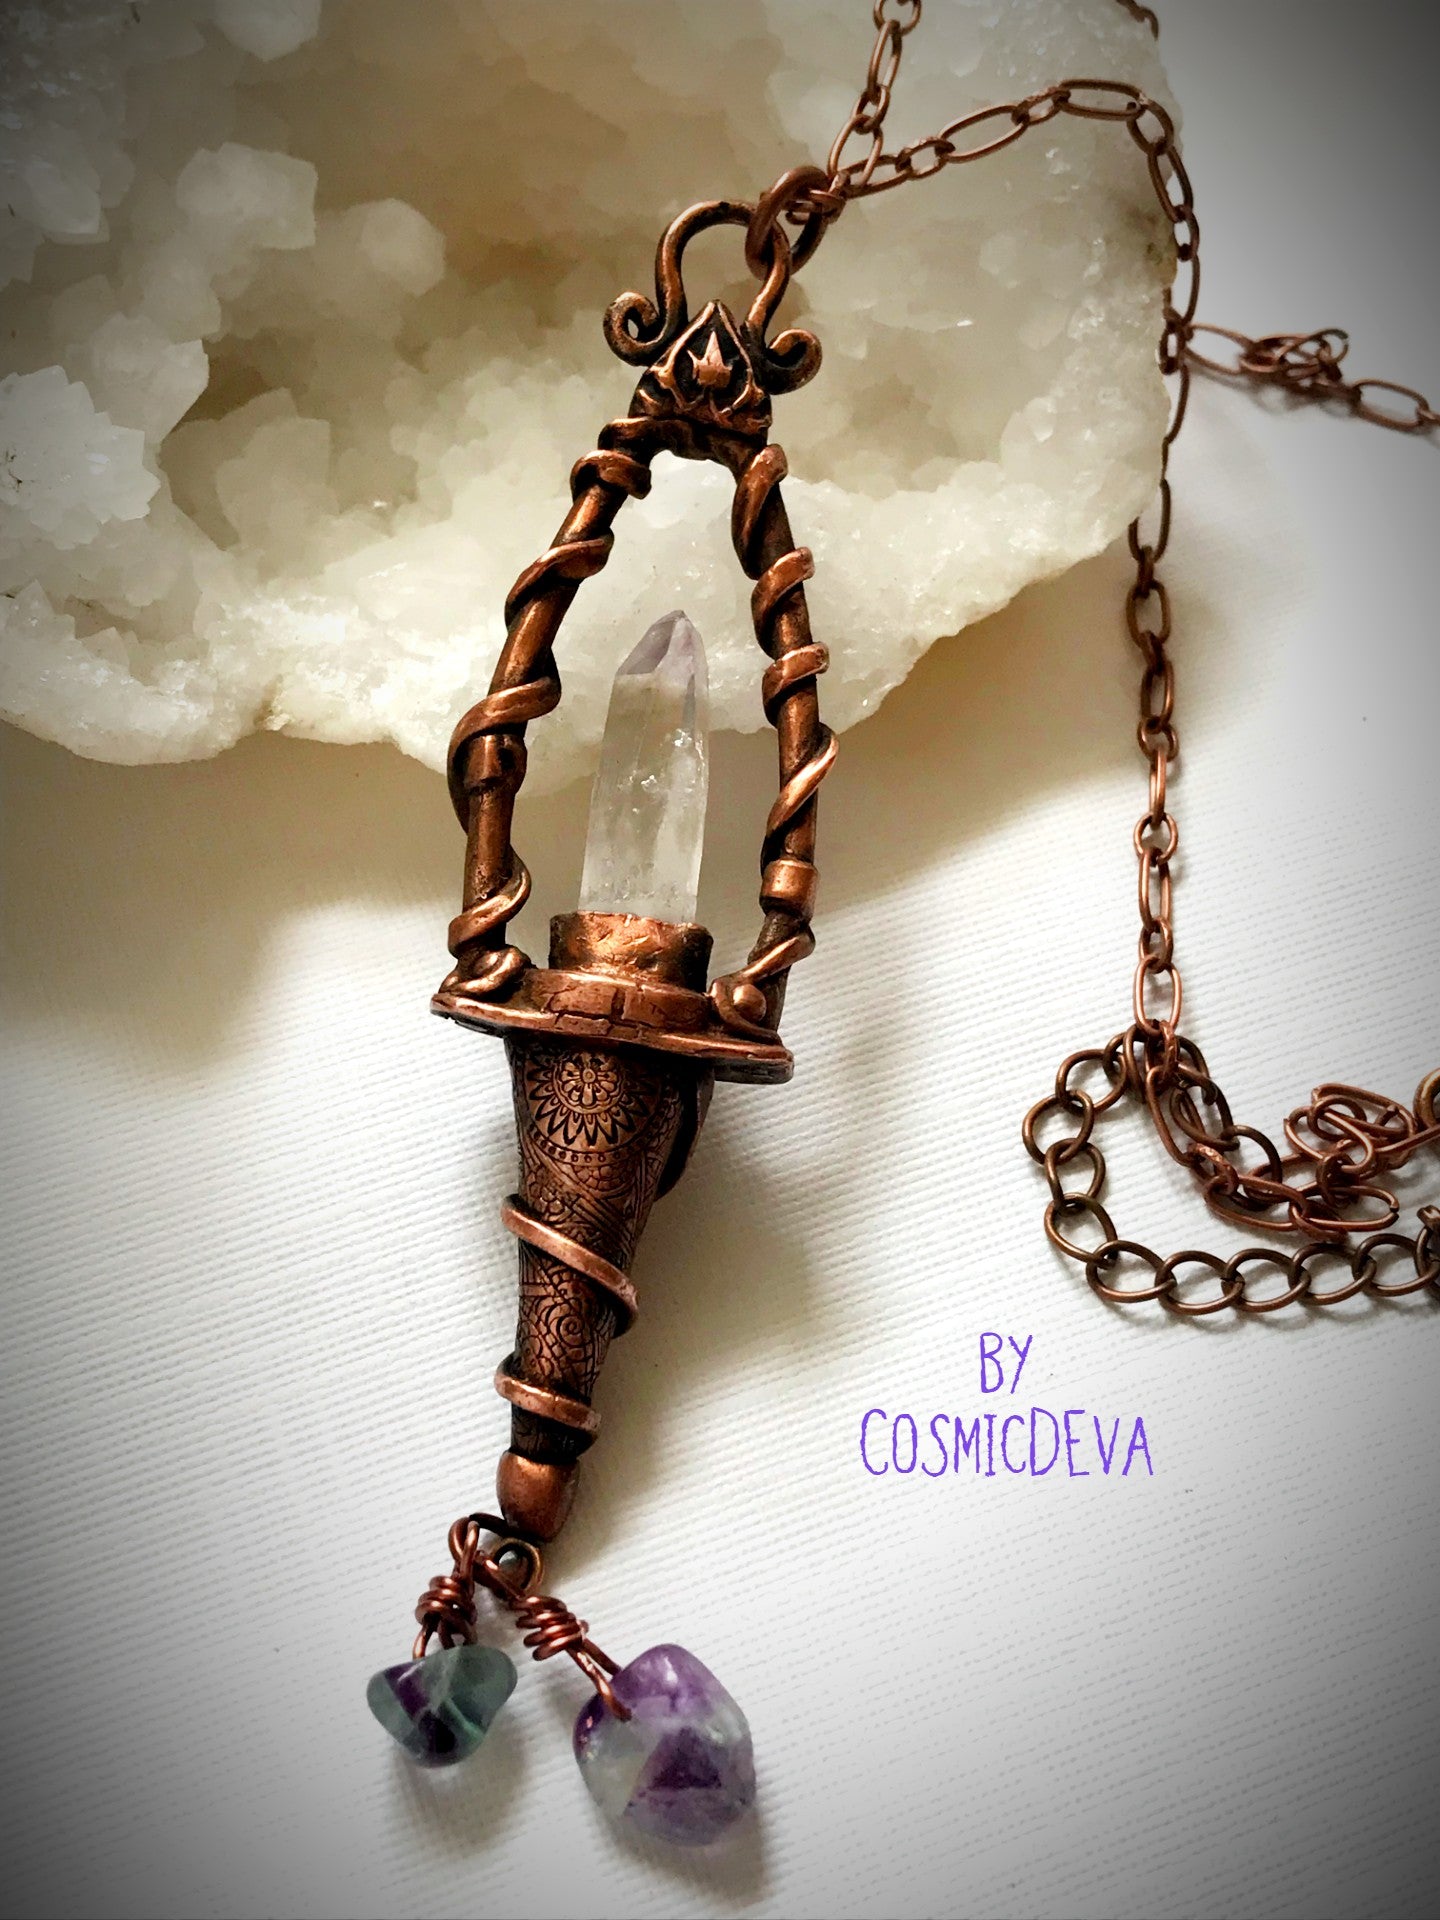 Weave a little magic into your wardrobe with this stunning magickal copper lantern necklace. Featuring a hand-sculpted, warm-glowing copper pendulum adorned with a super-clear Vera Cruz amethyst crystal point, plus two fluoride gemstones, it's a captivating conversation piece that will ignite your imagination. Suspended from an adjustable 21" copper chain, the oxidized finish and wax seal create a rich, deep warmth that will have you looking spell-bindingly beautiful. - CosmicDeva